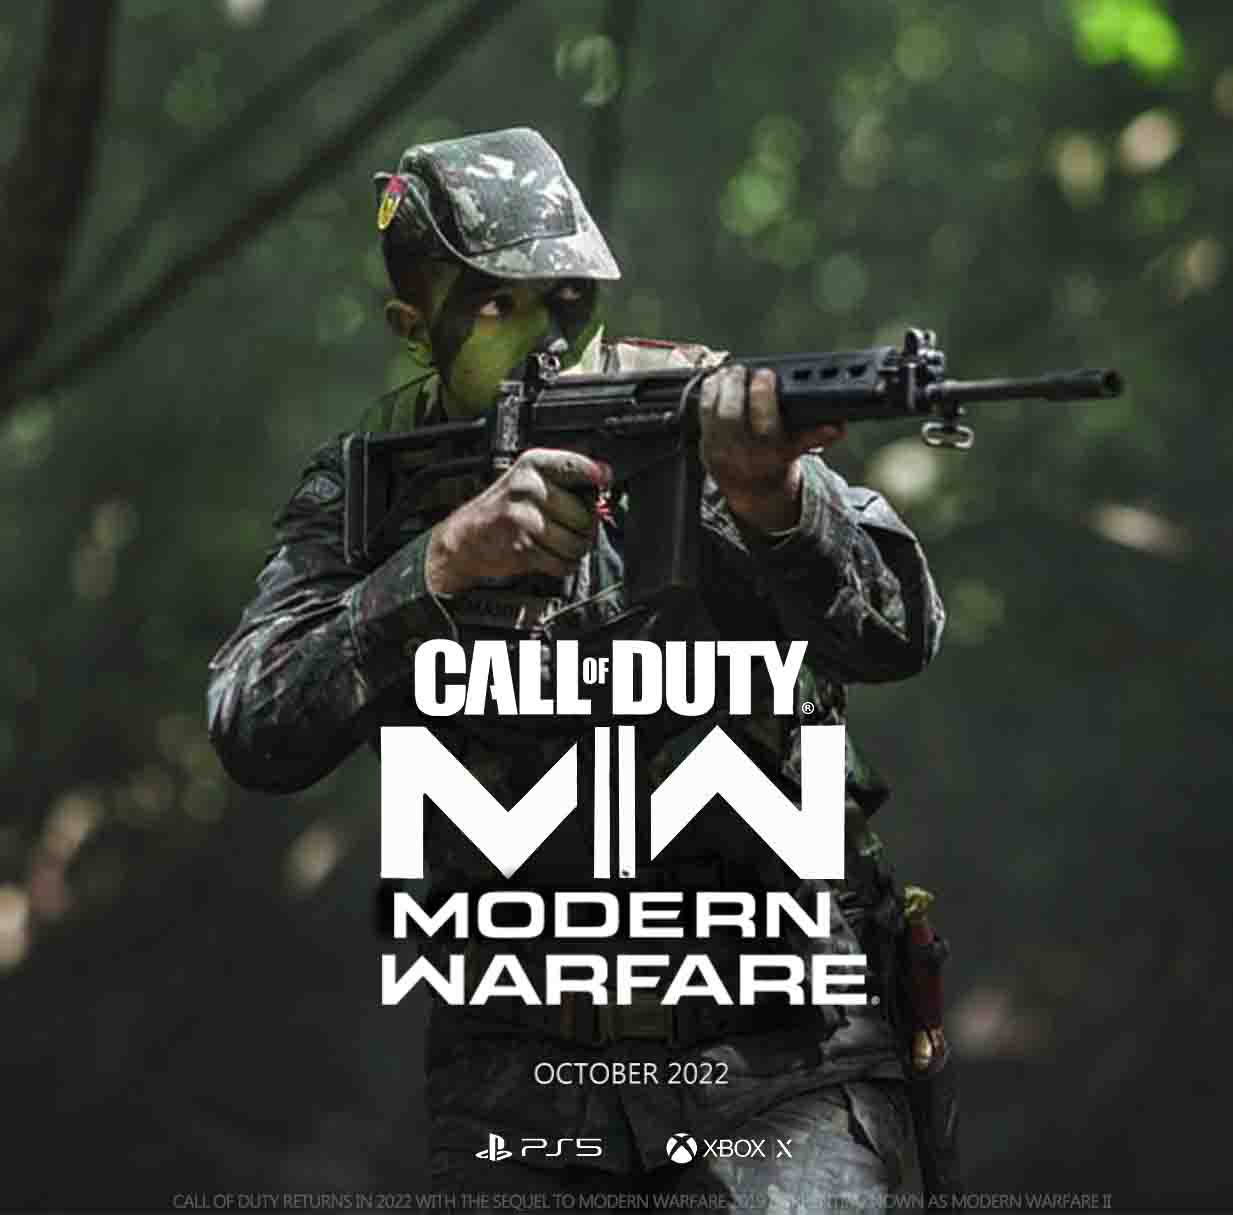 Call of Duty: World at War 2 Reveal Coming in May - Official Promo Poster  Reportedly Leaked